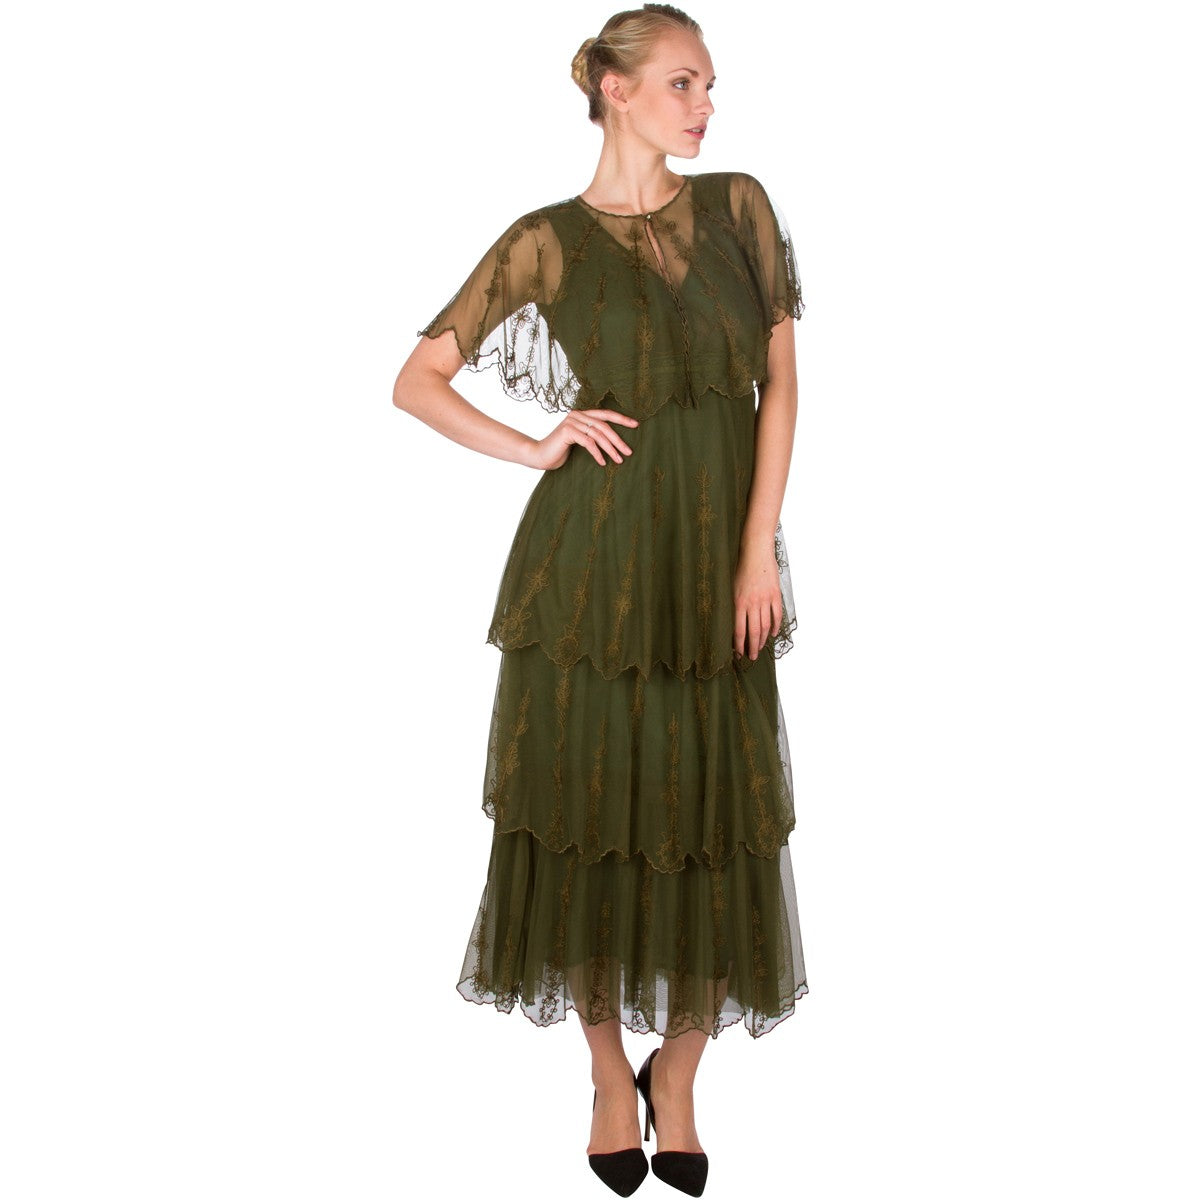 Vintage Inspired Empire Waist Party Dress in Emerald by Nataya - SOLD OUT